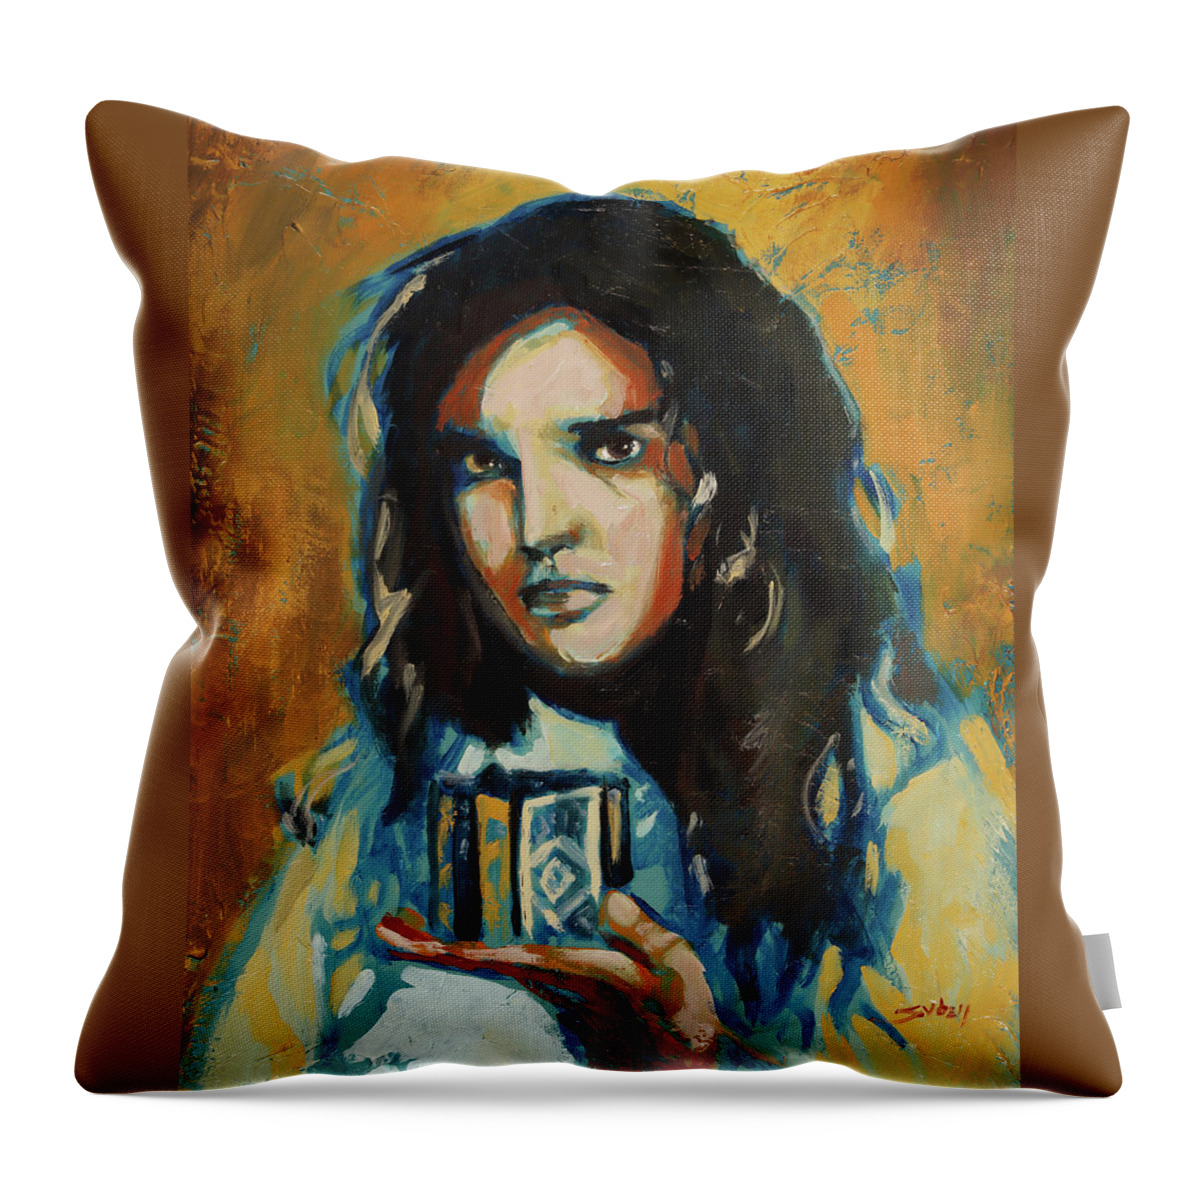 Hellraiser Throw Pillow featuring the painting Ashley Laurence by Sv Bell